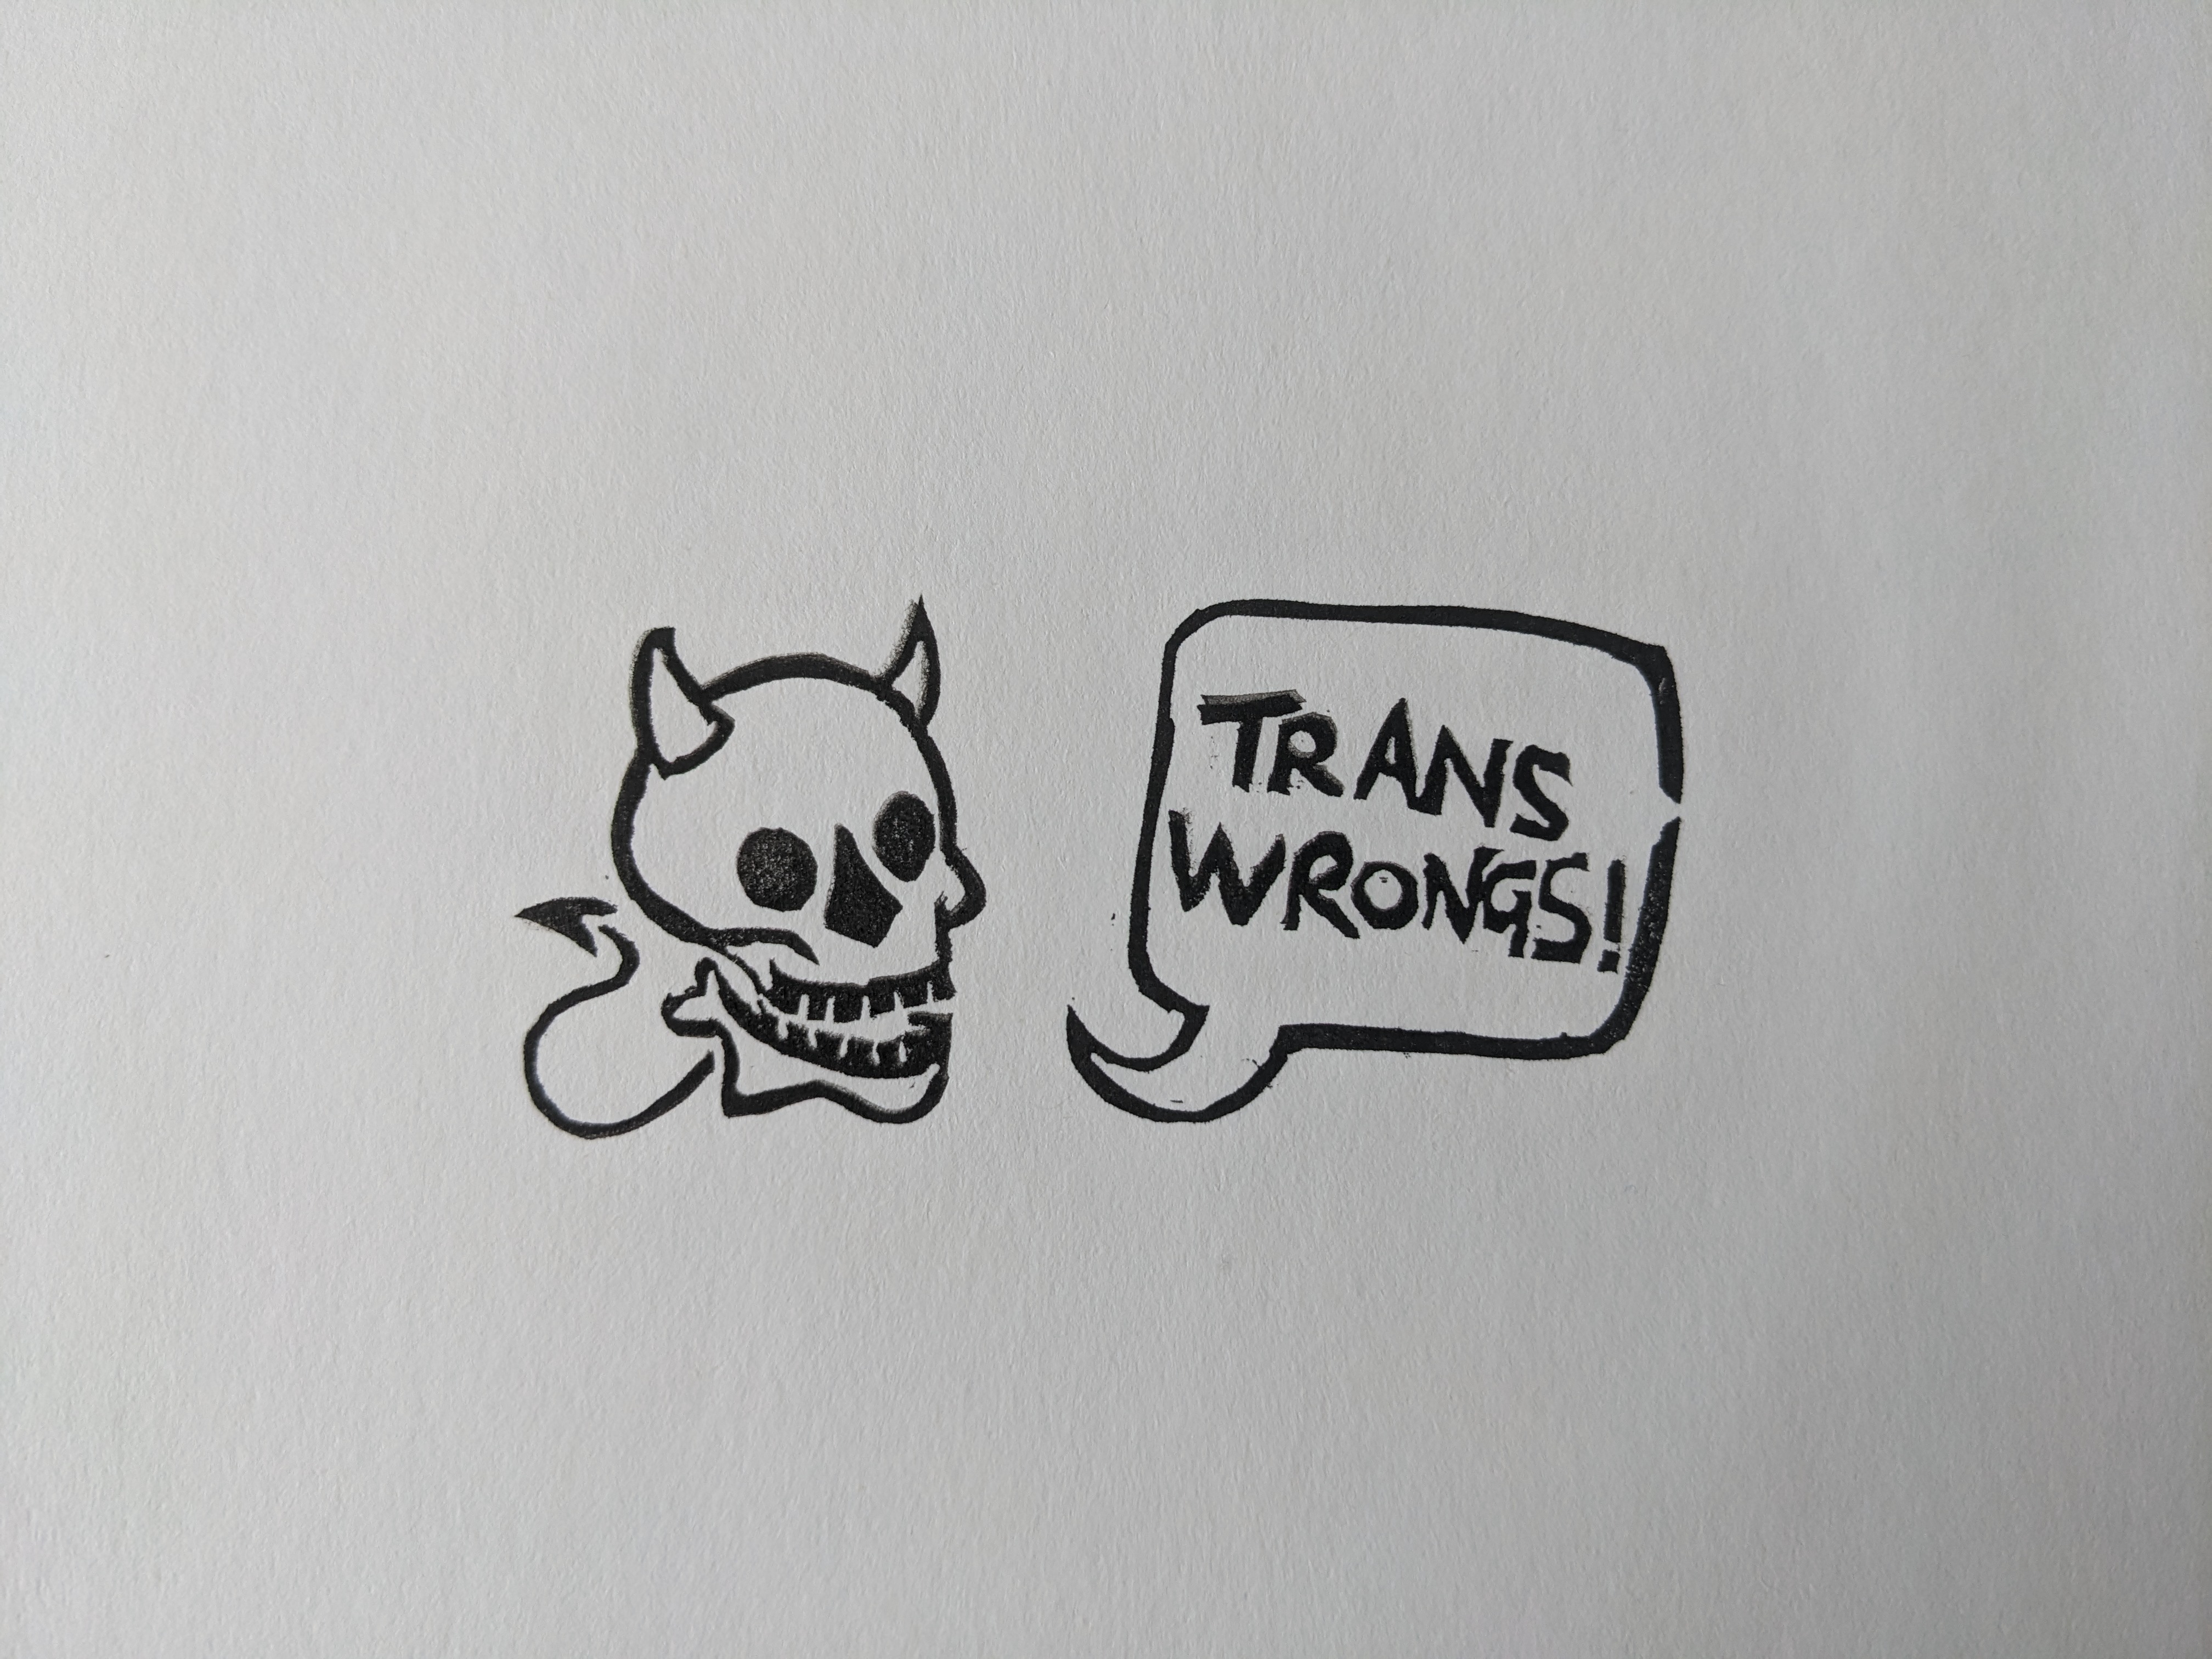 A smiling skull with devil horns and a little spiked tail, and a speech bubble reading 'trans wrongs!'